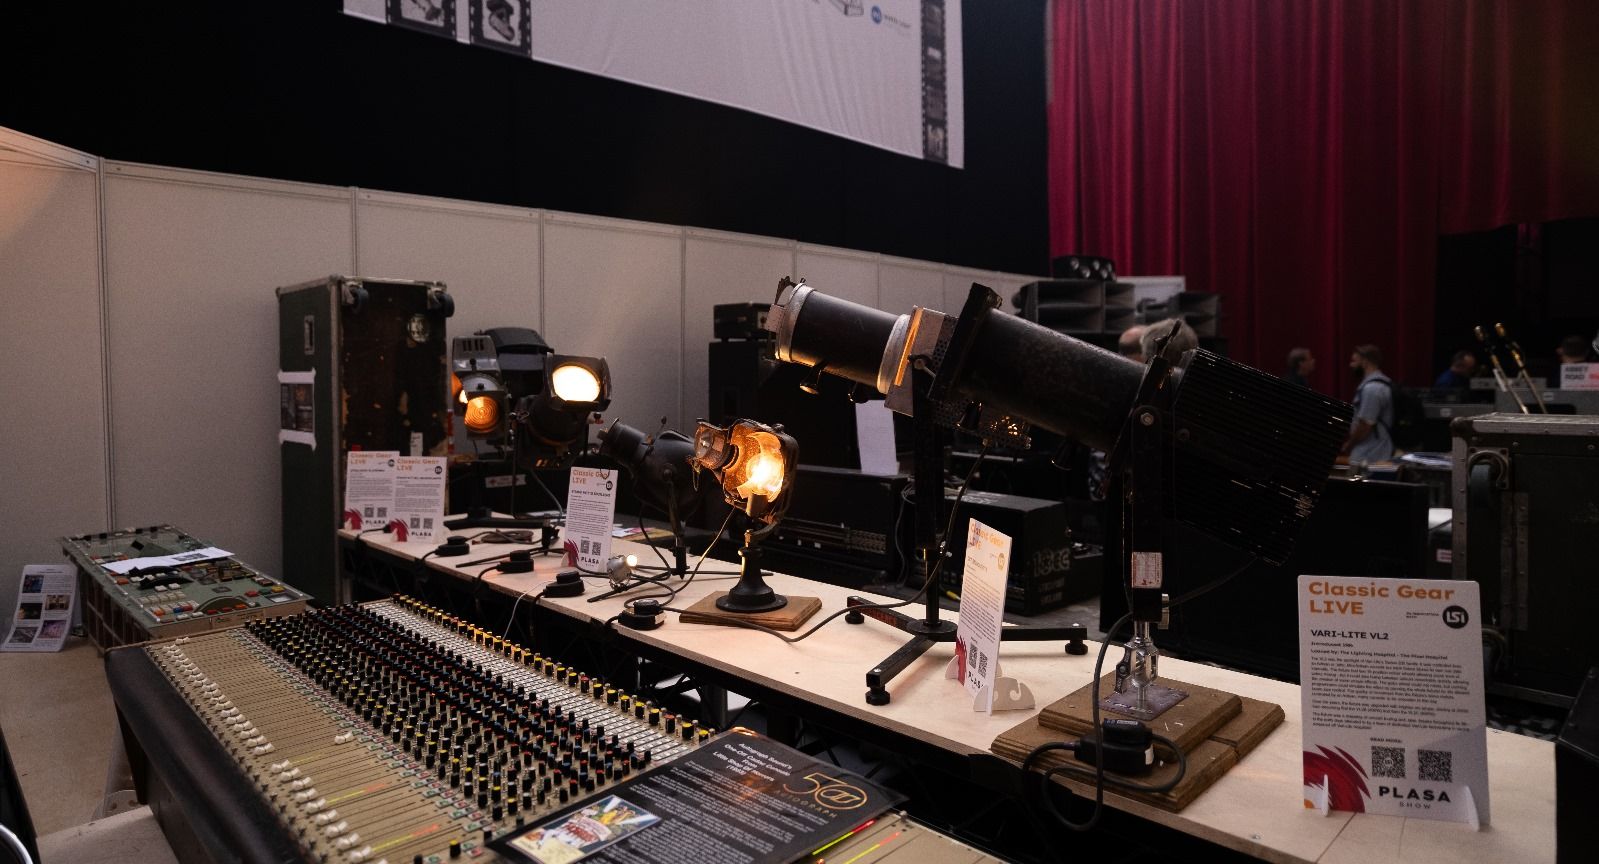 classic gear live vintage lighting and audio product display at plasa show 2023